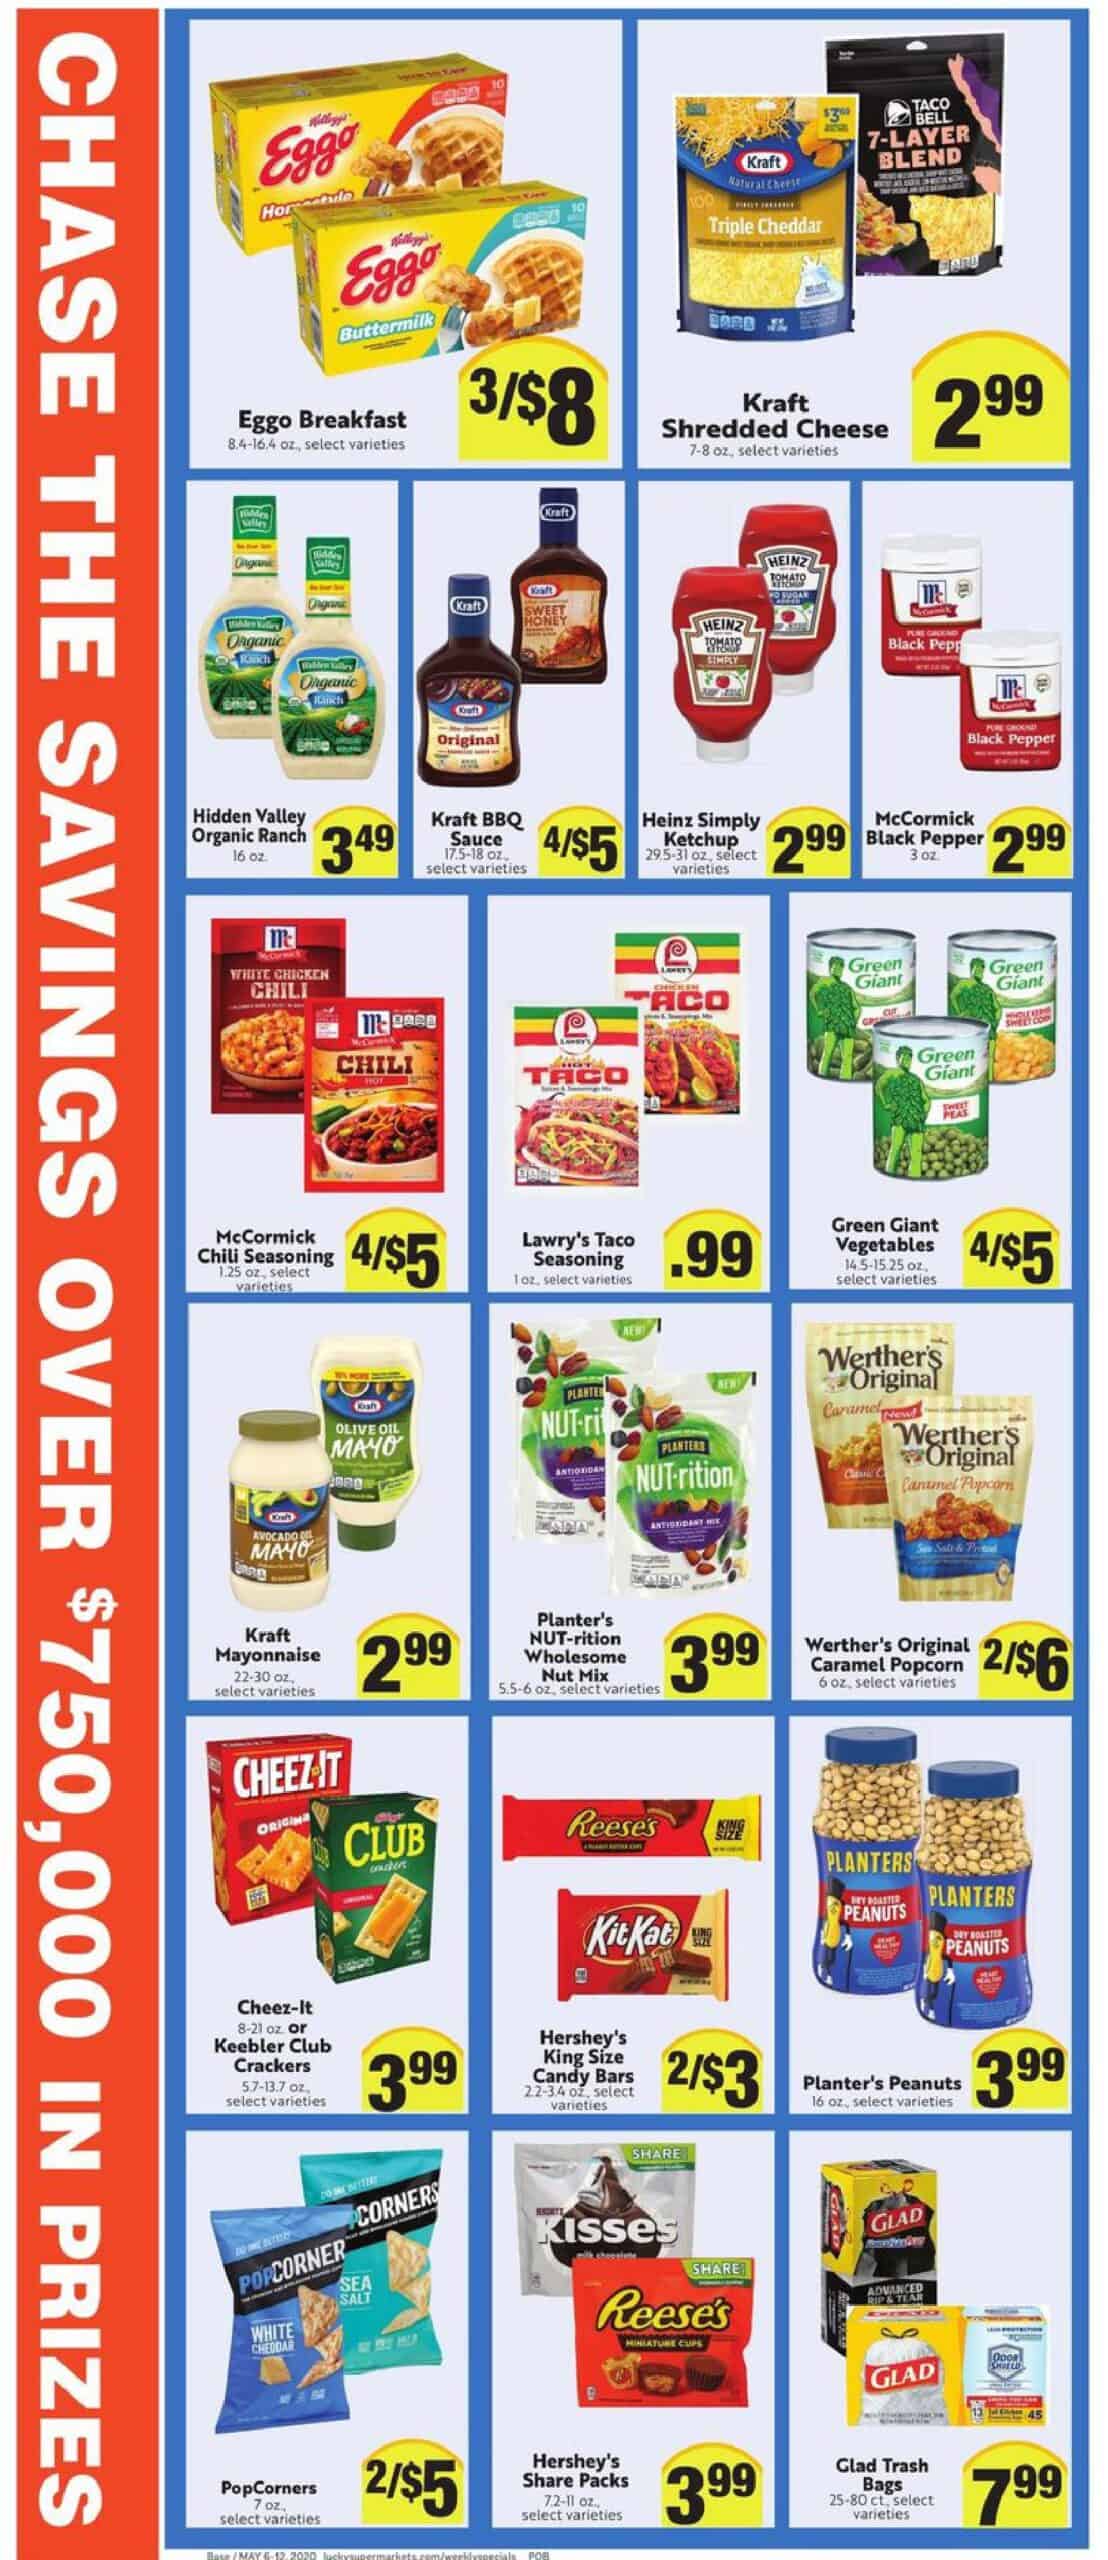 Luckys Weekly Ad Scan